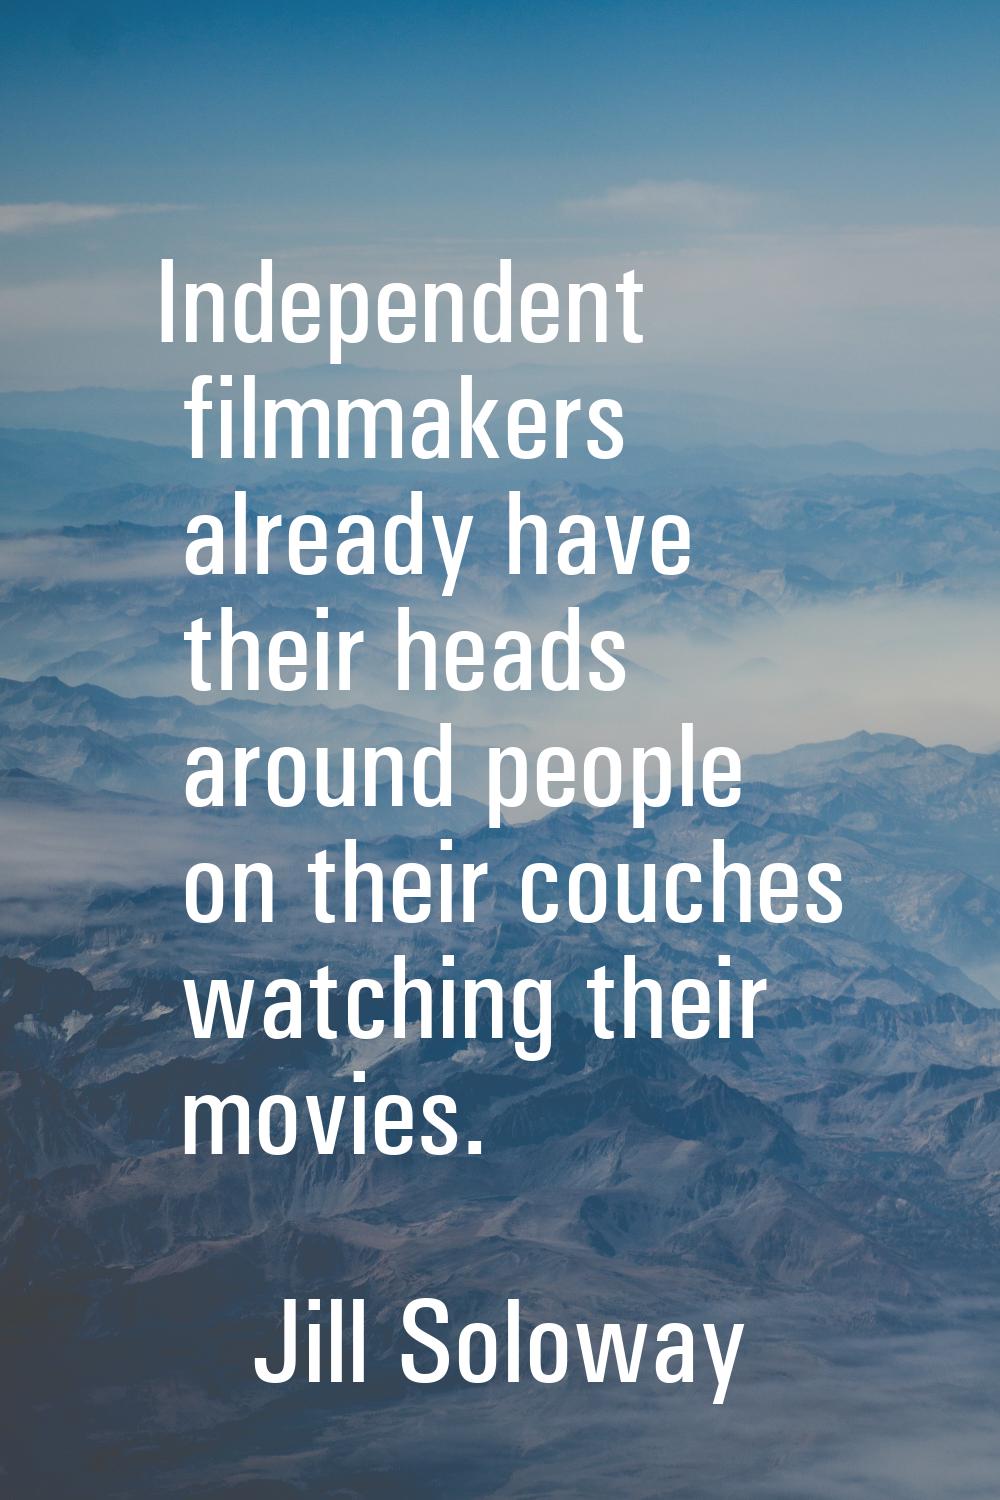 Independent filmmakers already have their heads around people on their couches watching their movie